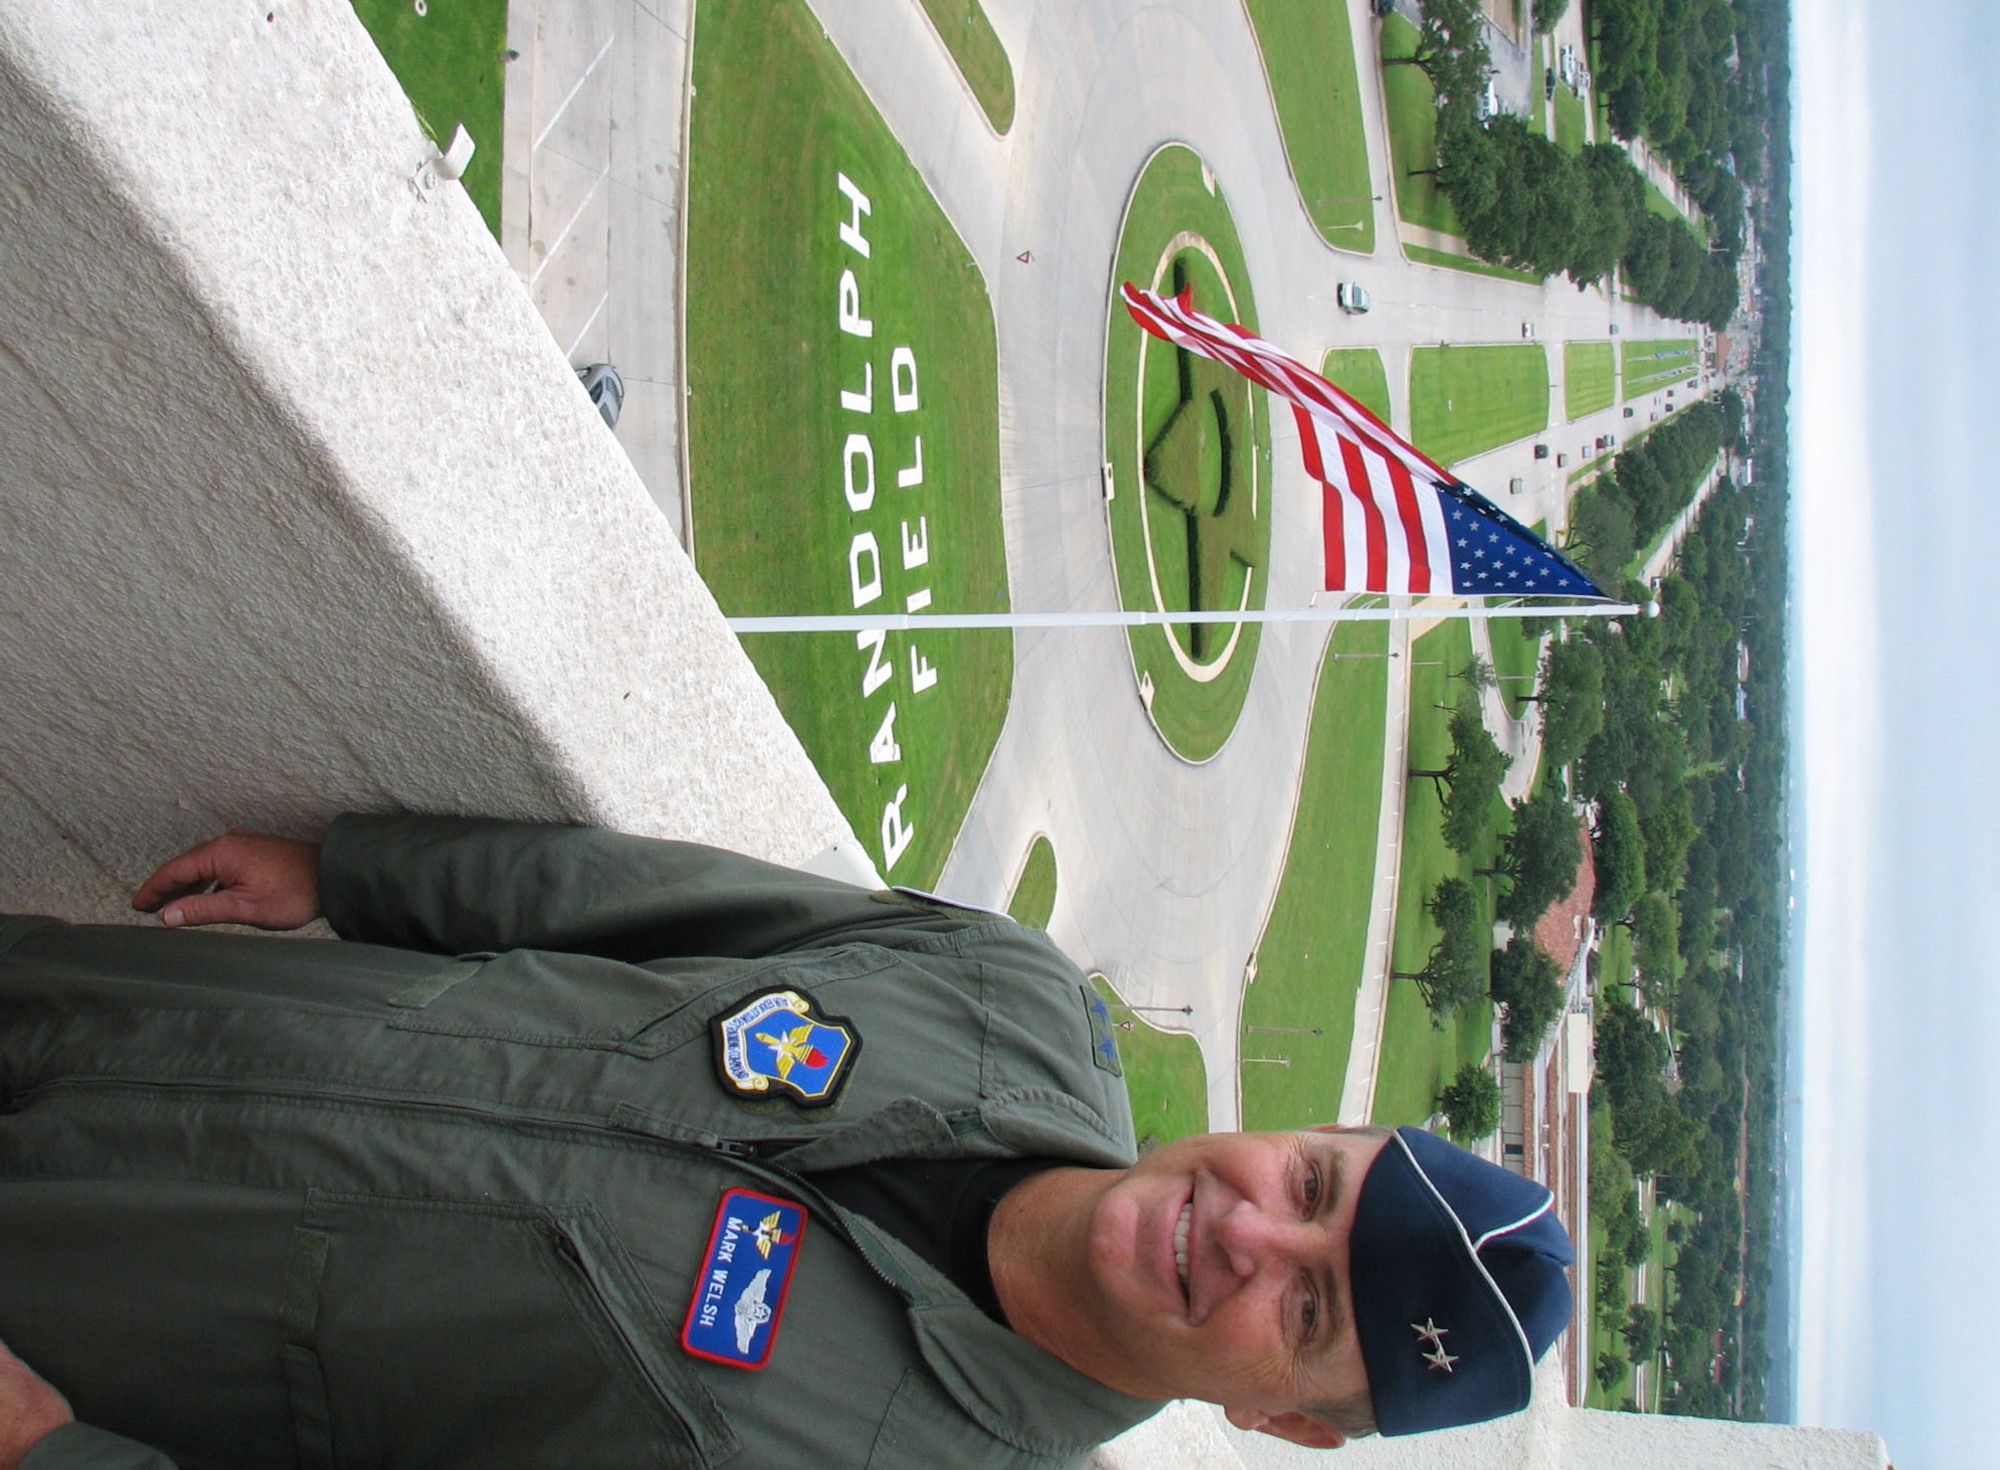 Maj. Gen. Mark A. Welsh III, Air Education and Training Command vice commander, pauses while touring the observation deck of the historic "Taj Mahal" building housing the 12th Flying Training Wing headquarters at Randolph Air Force Base, Texas, July 26.  General Welsh replaces Lt. Gen. Dennis Larsen, who retired today (July 27, 2007).  (U.S. Air Force photo by Tech. Sgt. Mike Hammond)